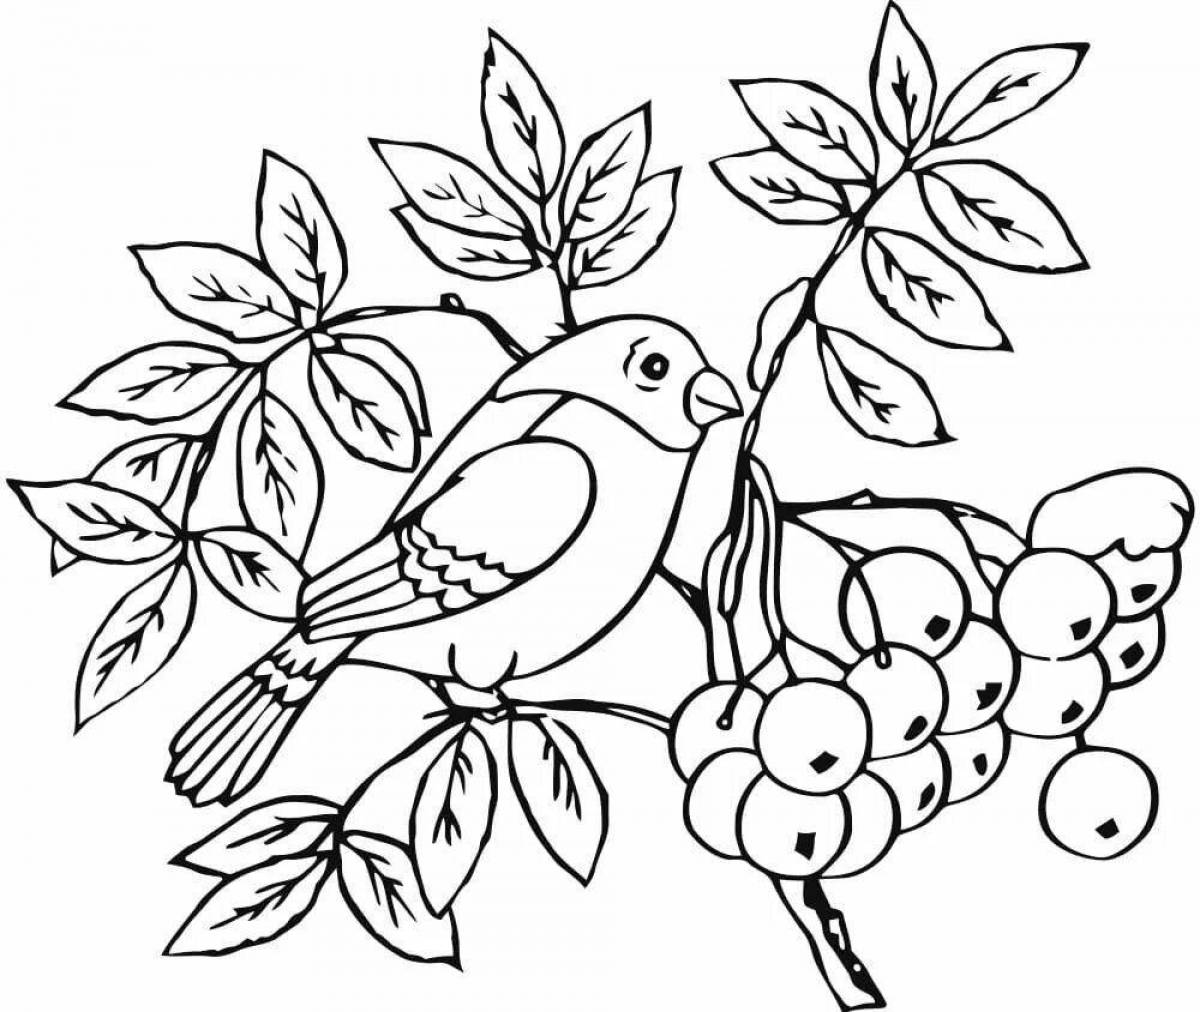 Exquisite winter birds coloring book for kids